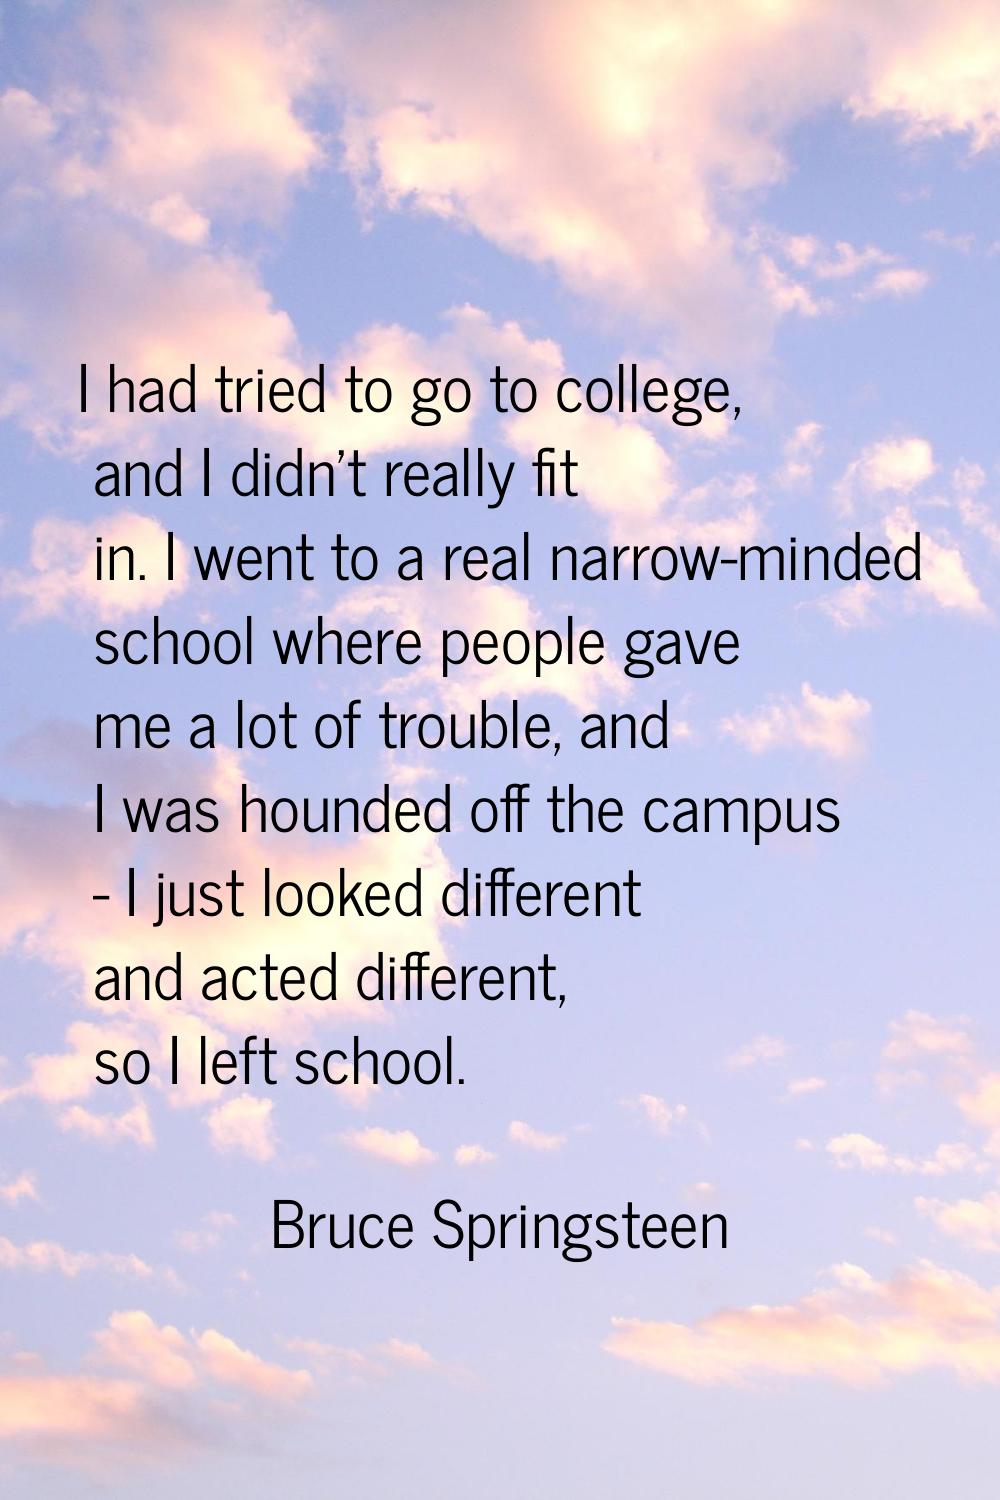 I had tried to go to college, and I didn't really fit in. I went to a real narrow-minded school whe